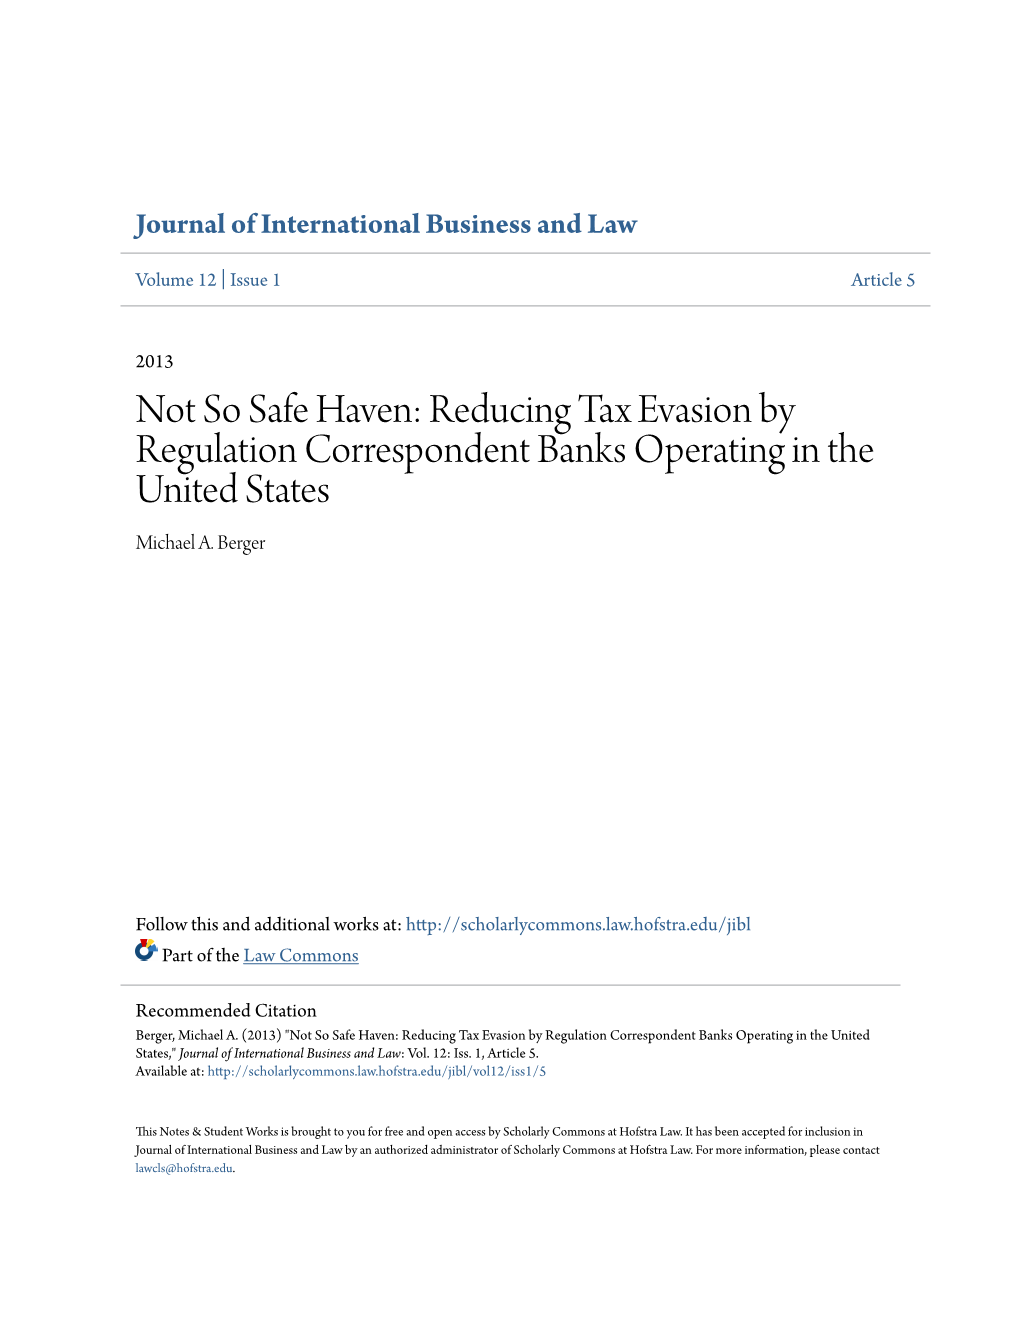 Not So Safe Haven: Reducing Tax Evasion by Regulation Correspondent Banks Operating in the United States Michael A